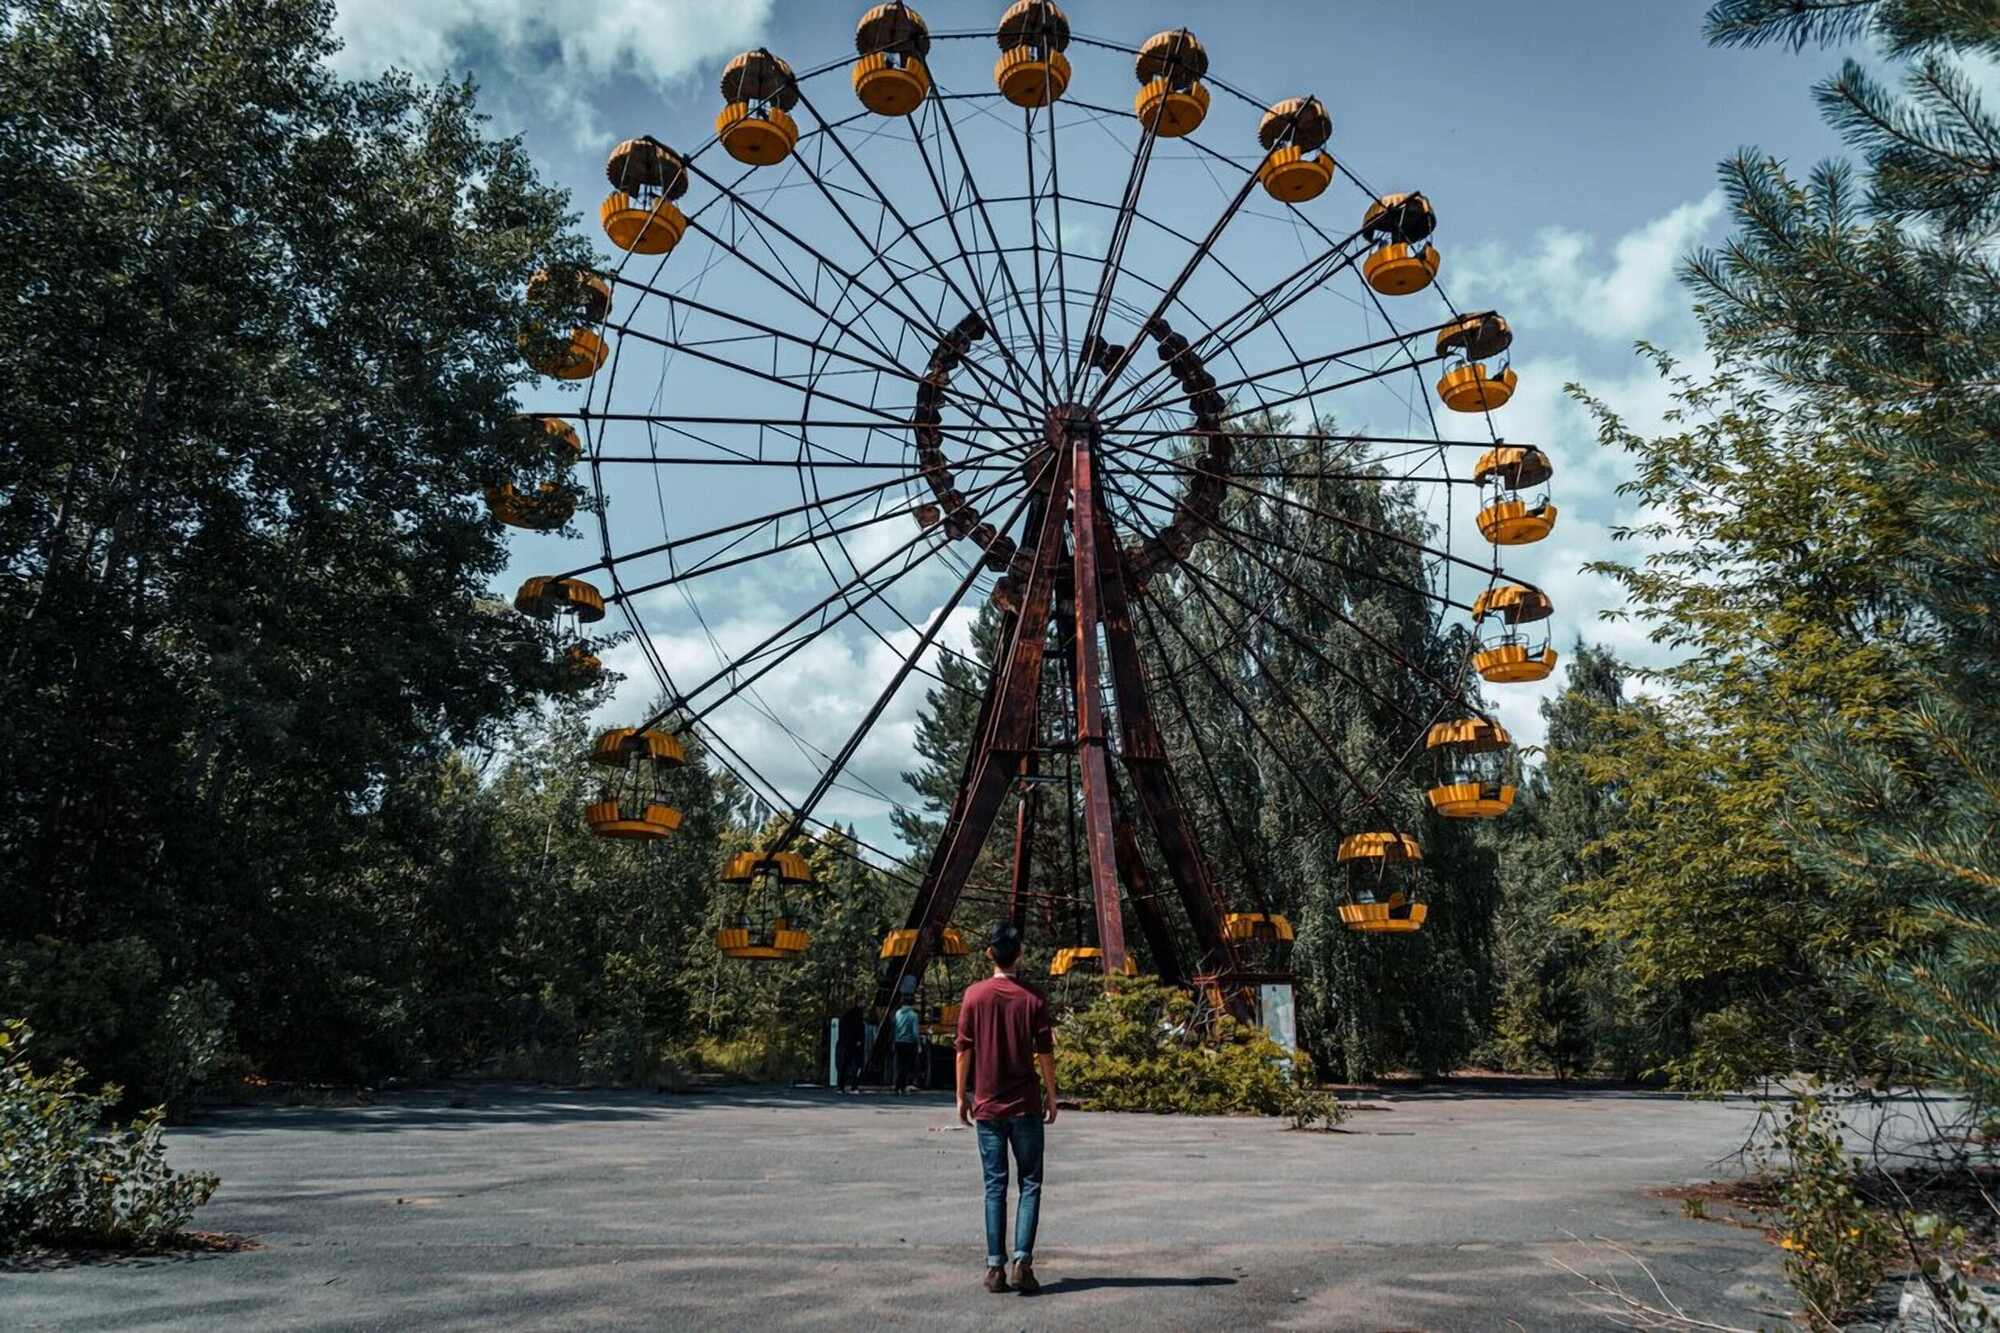 A Complete Travel Guide on How to Visit Chernobyl, Ukraine - Here's How to Visit Chernobyl and Pripyat from Kyiv